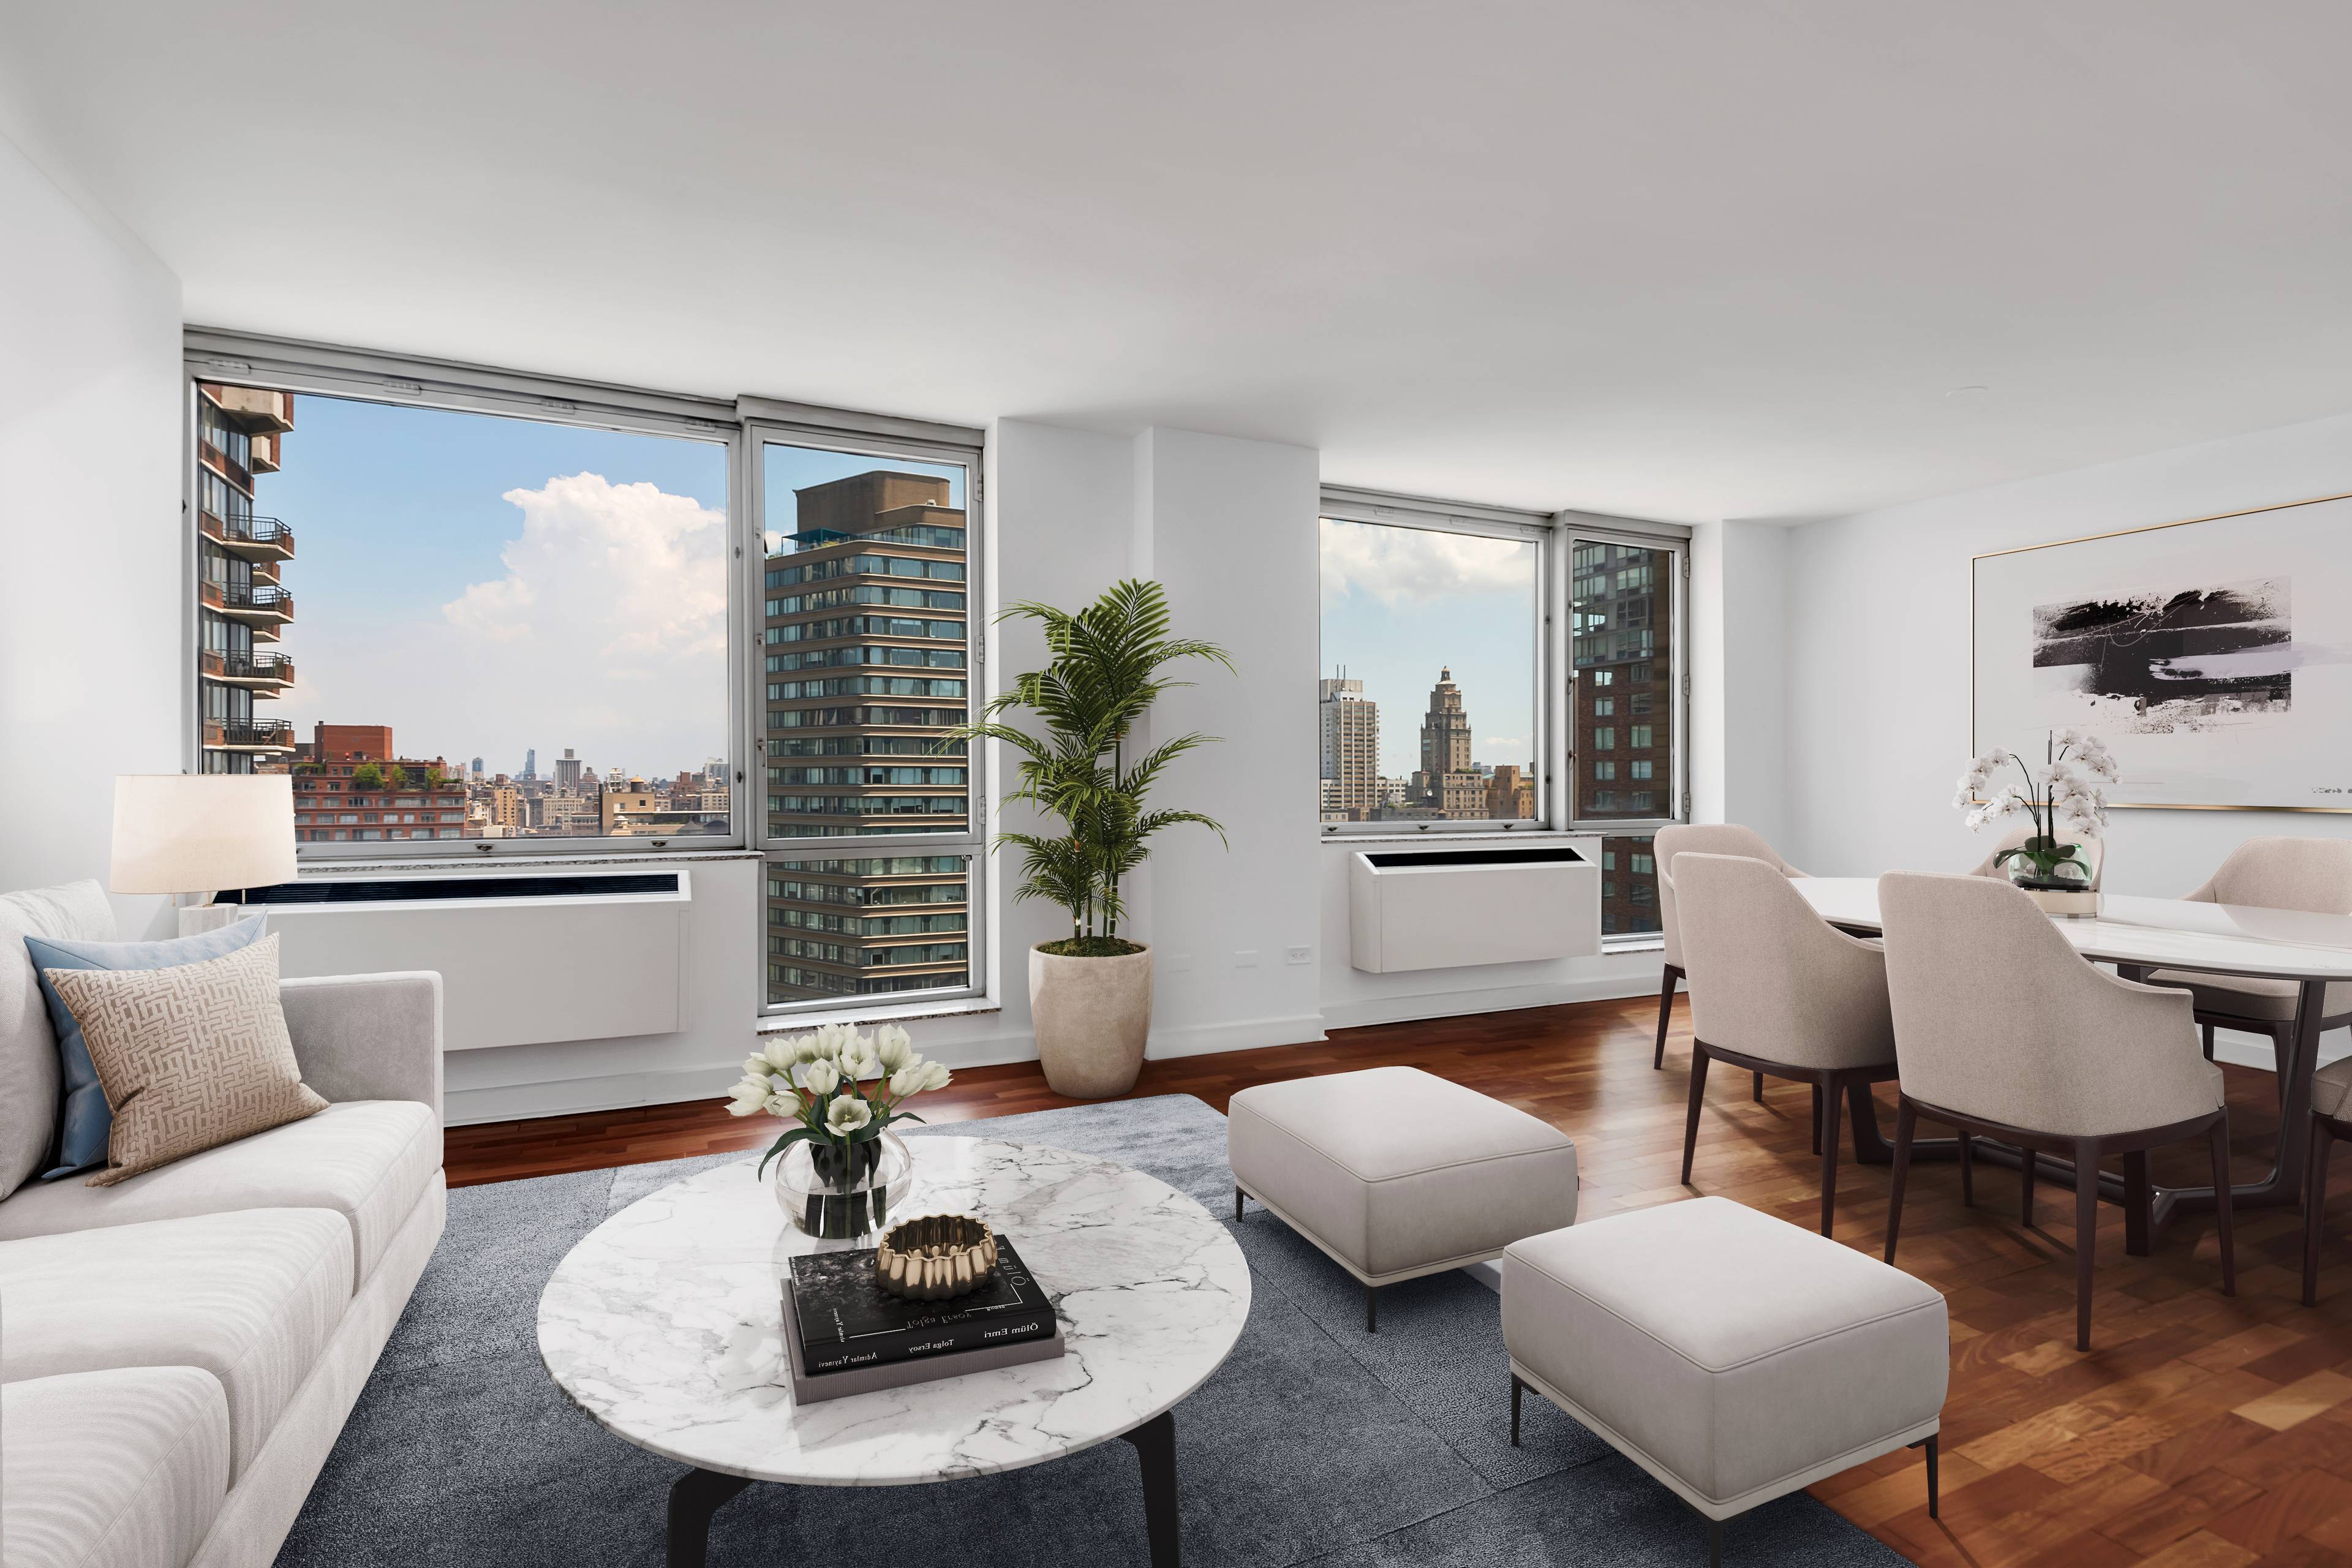 Welcome home to this fabulous one bedroom in one of the most highly desired residential condominiums on Manhattan's West Side.